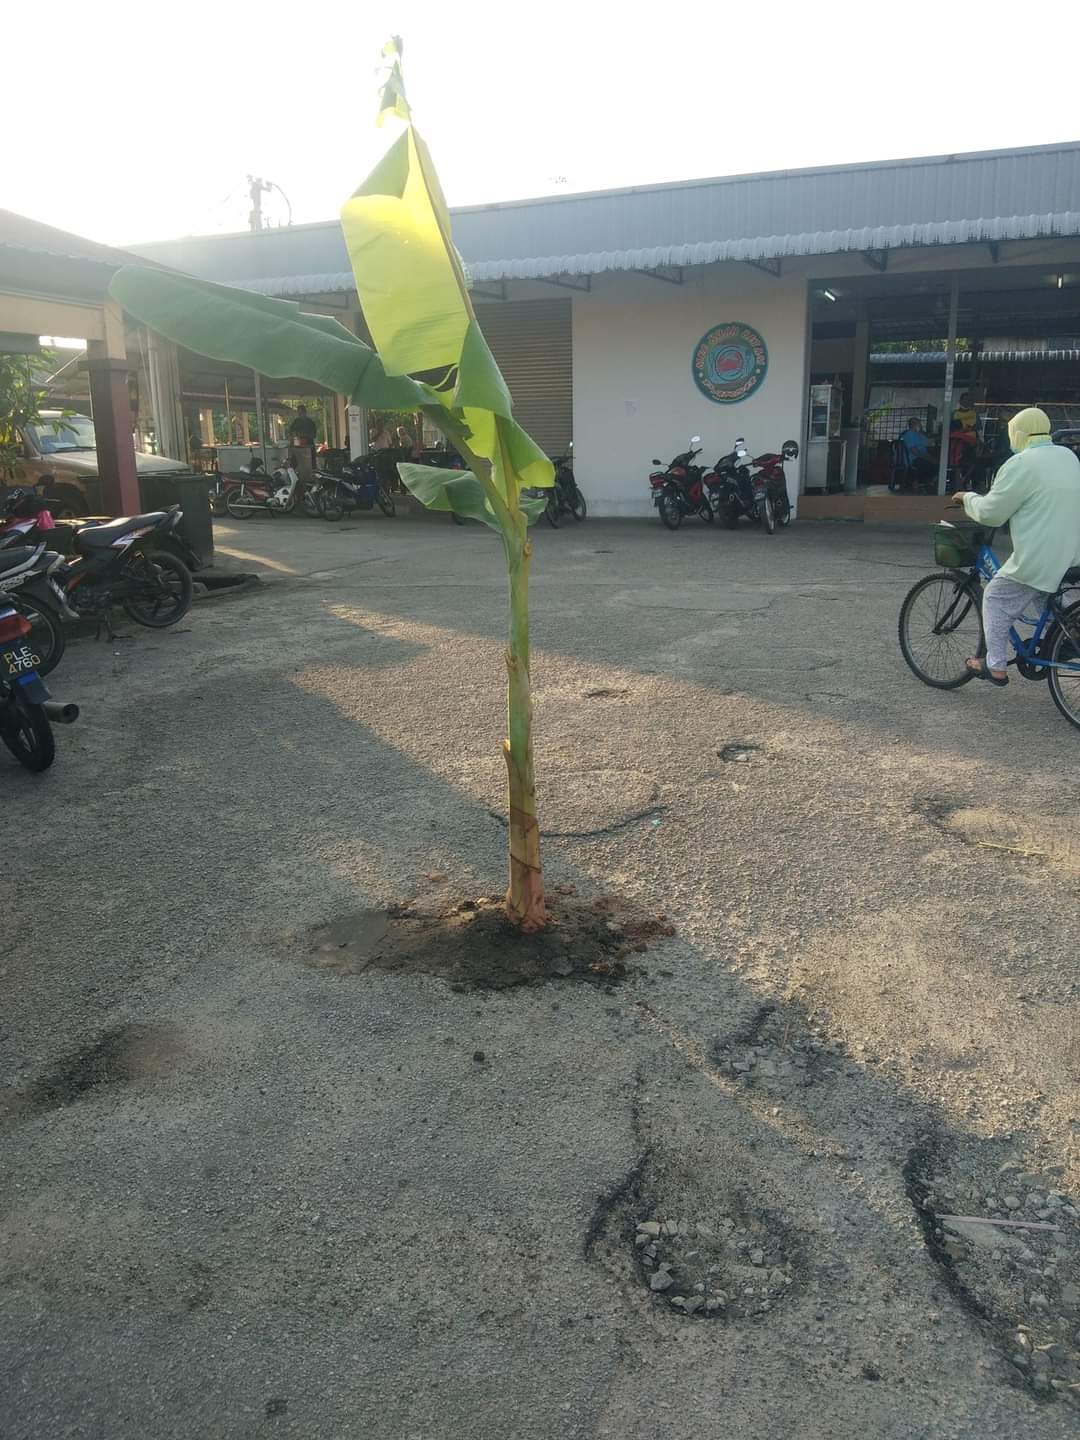 The banana trees planted in potholes.